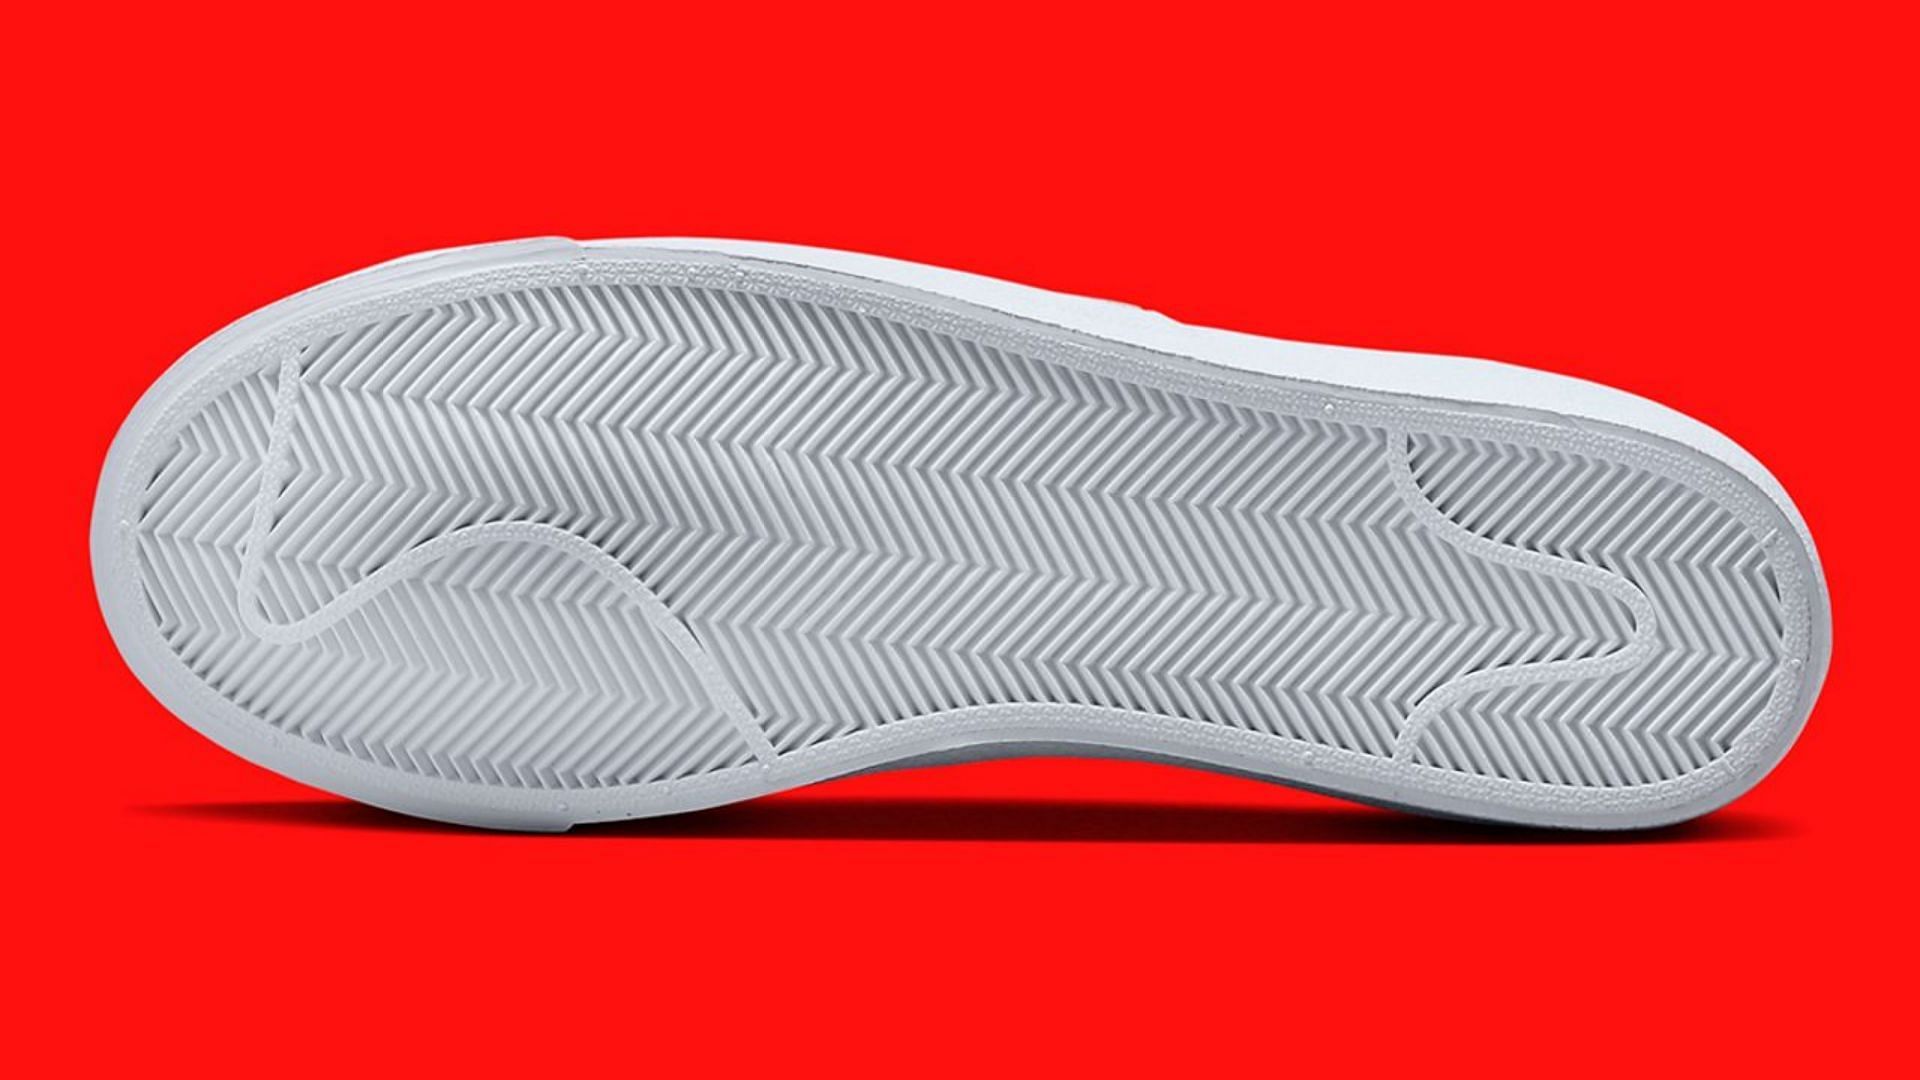 The sole unit of sneakers (Image via Nike)